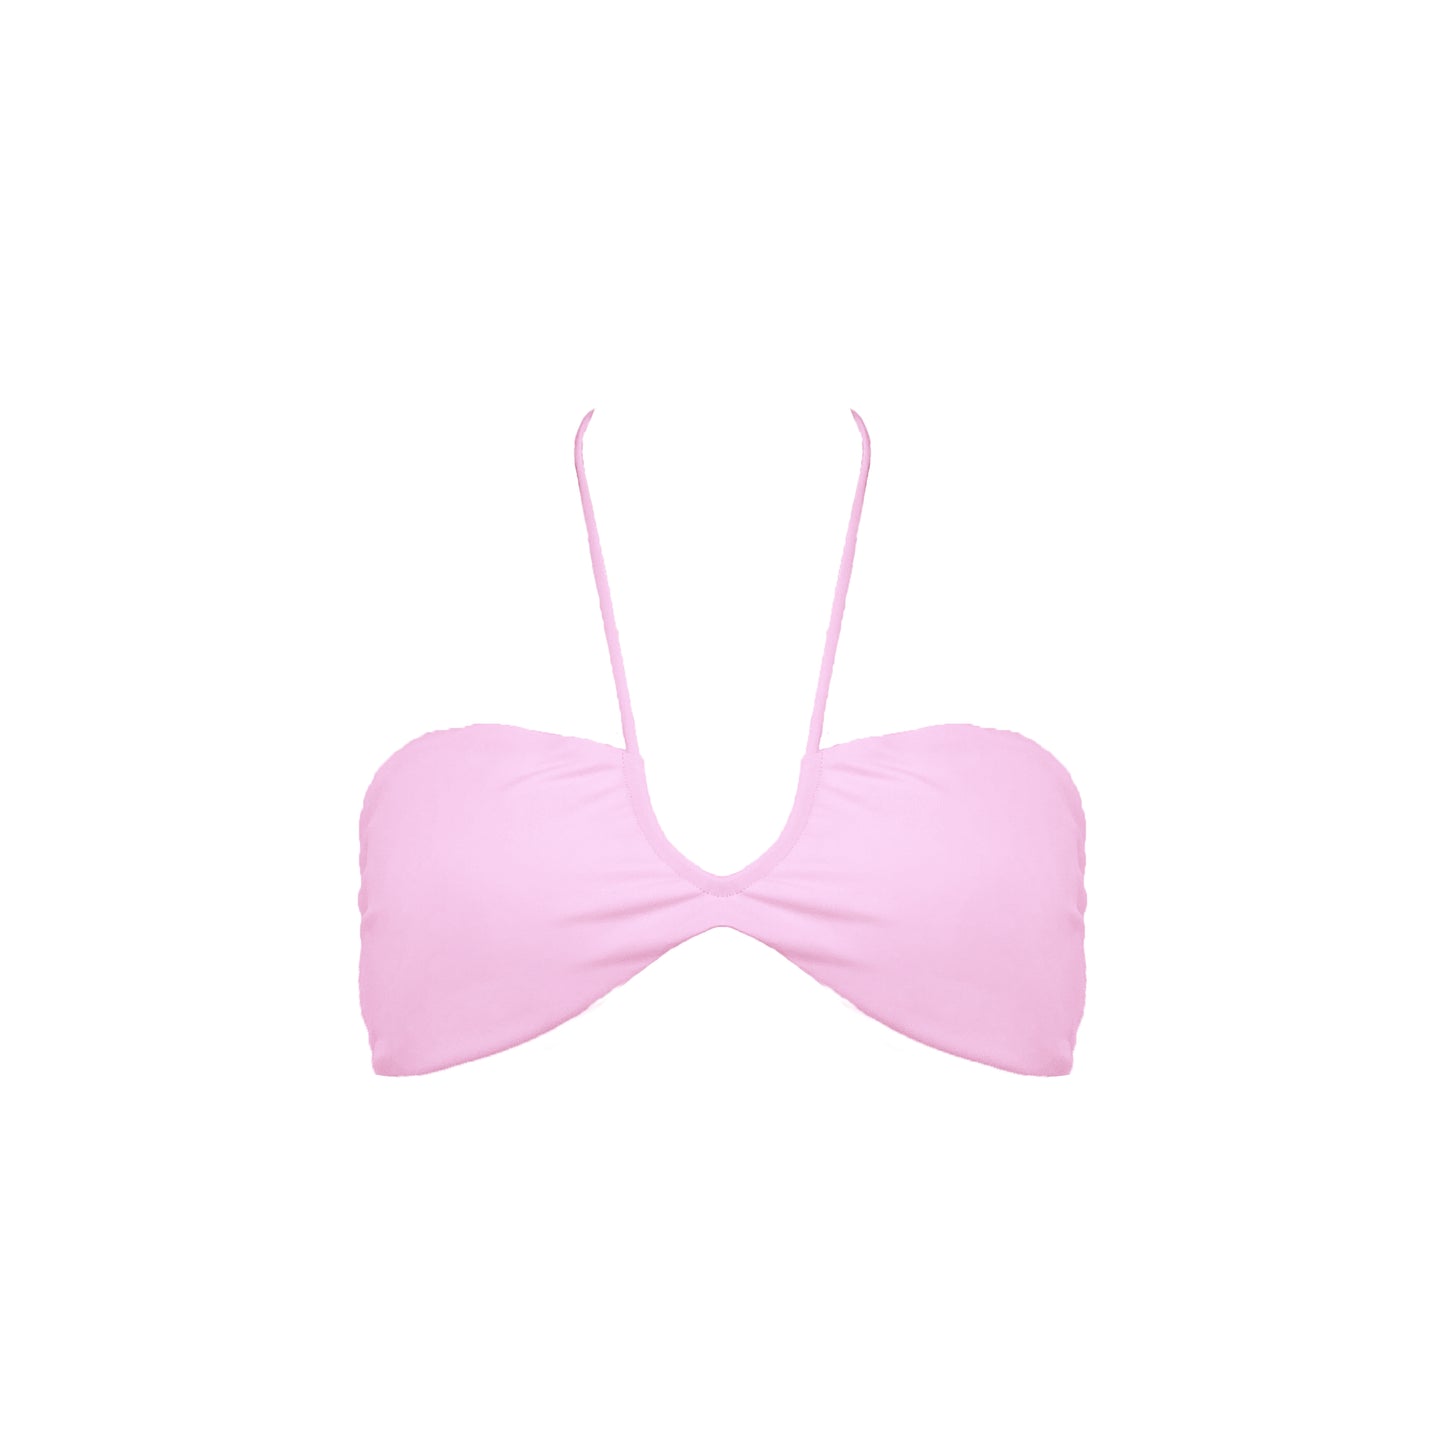 Pastel pink strapless bikini top with front halter strap and adjustable tie back.